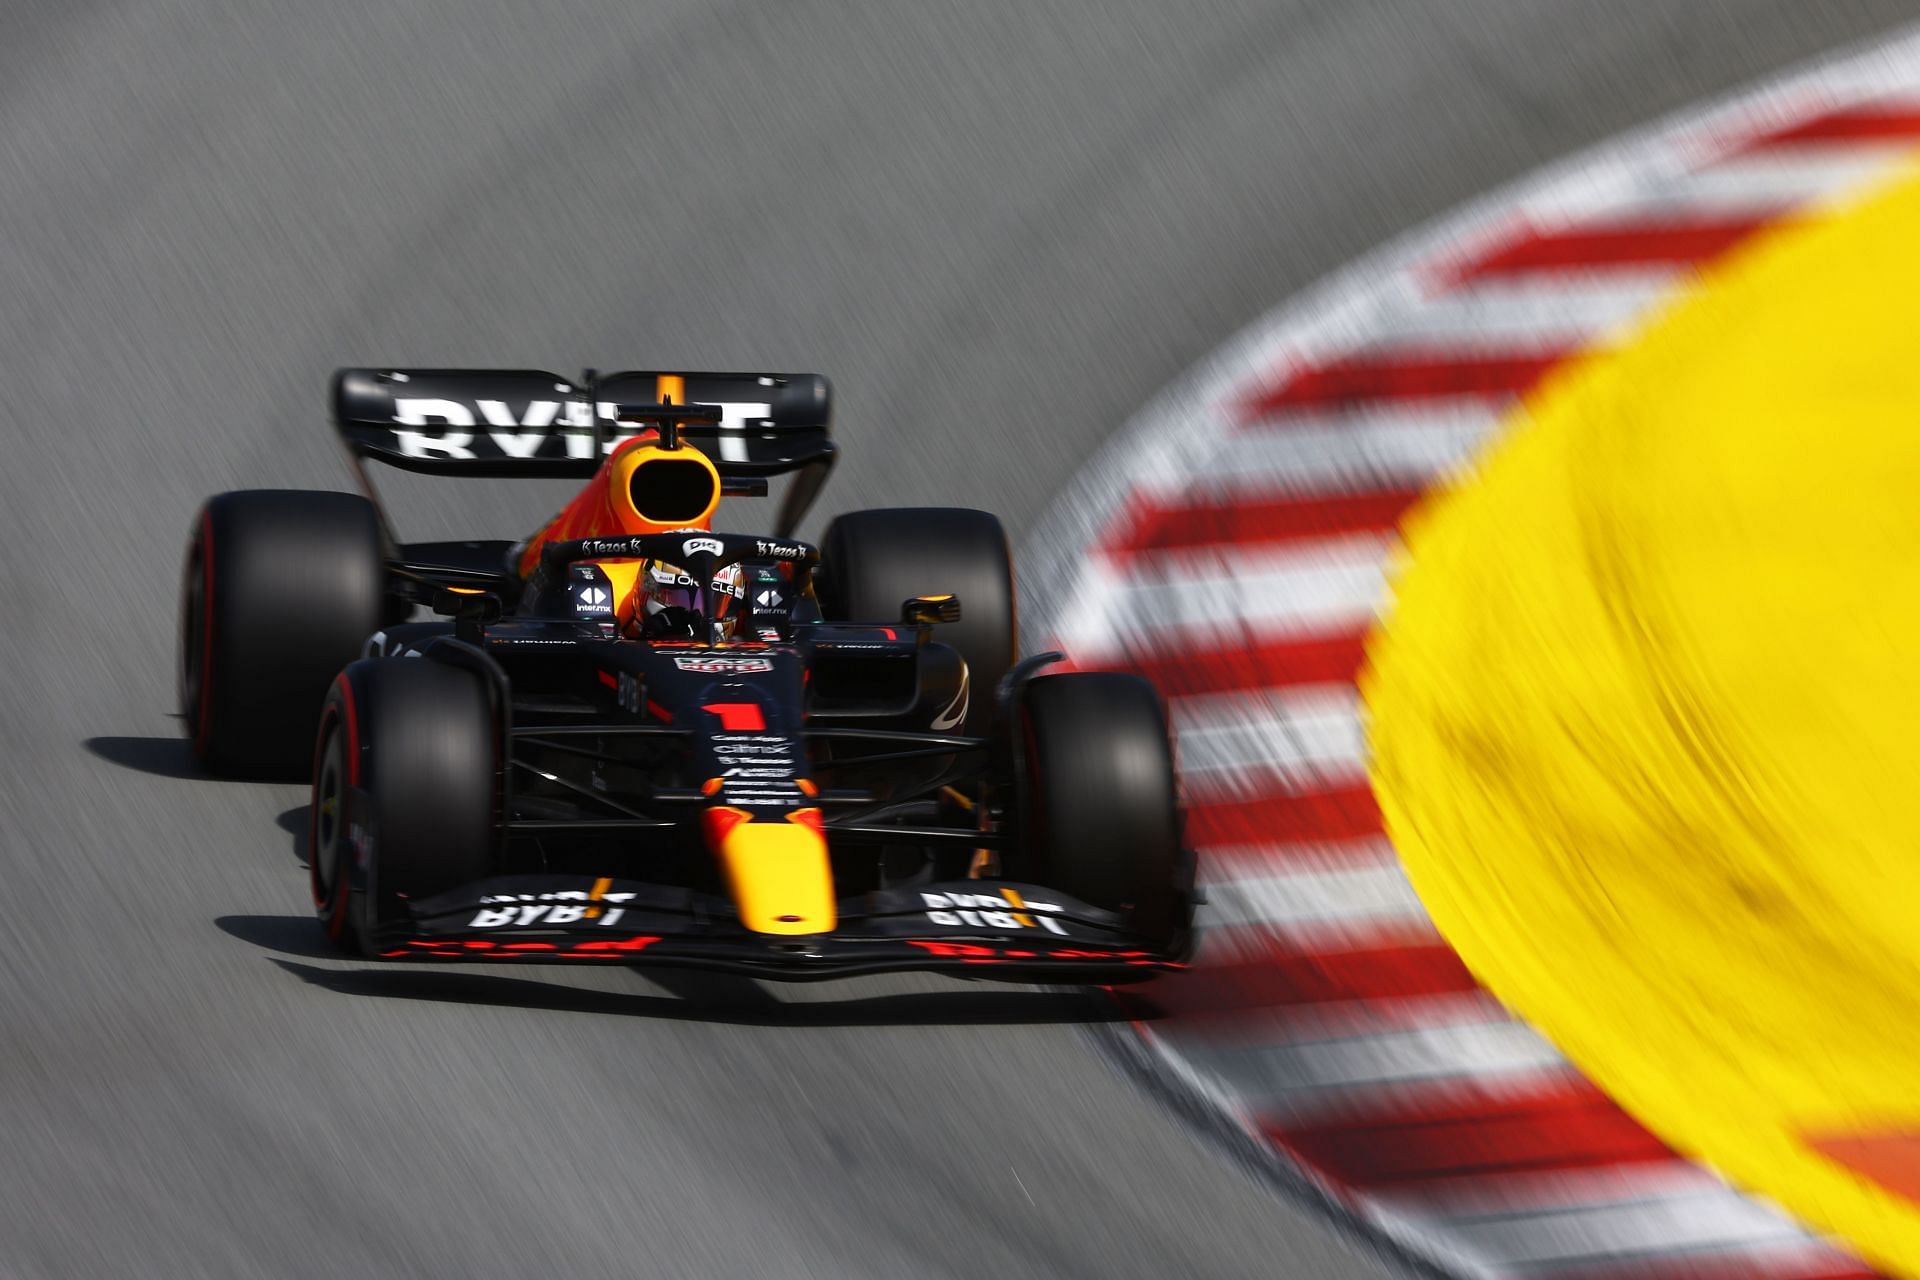 Max Verstappen in action during qualifying for the 2022 F1 Spanish GP. (Photo by Lars Baron/Getty Images)